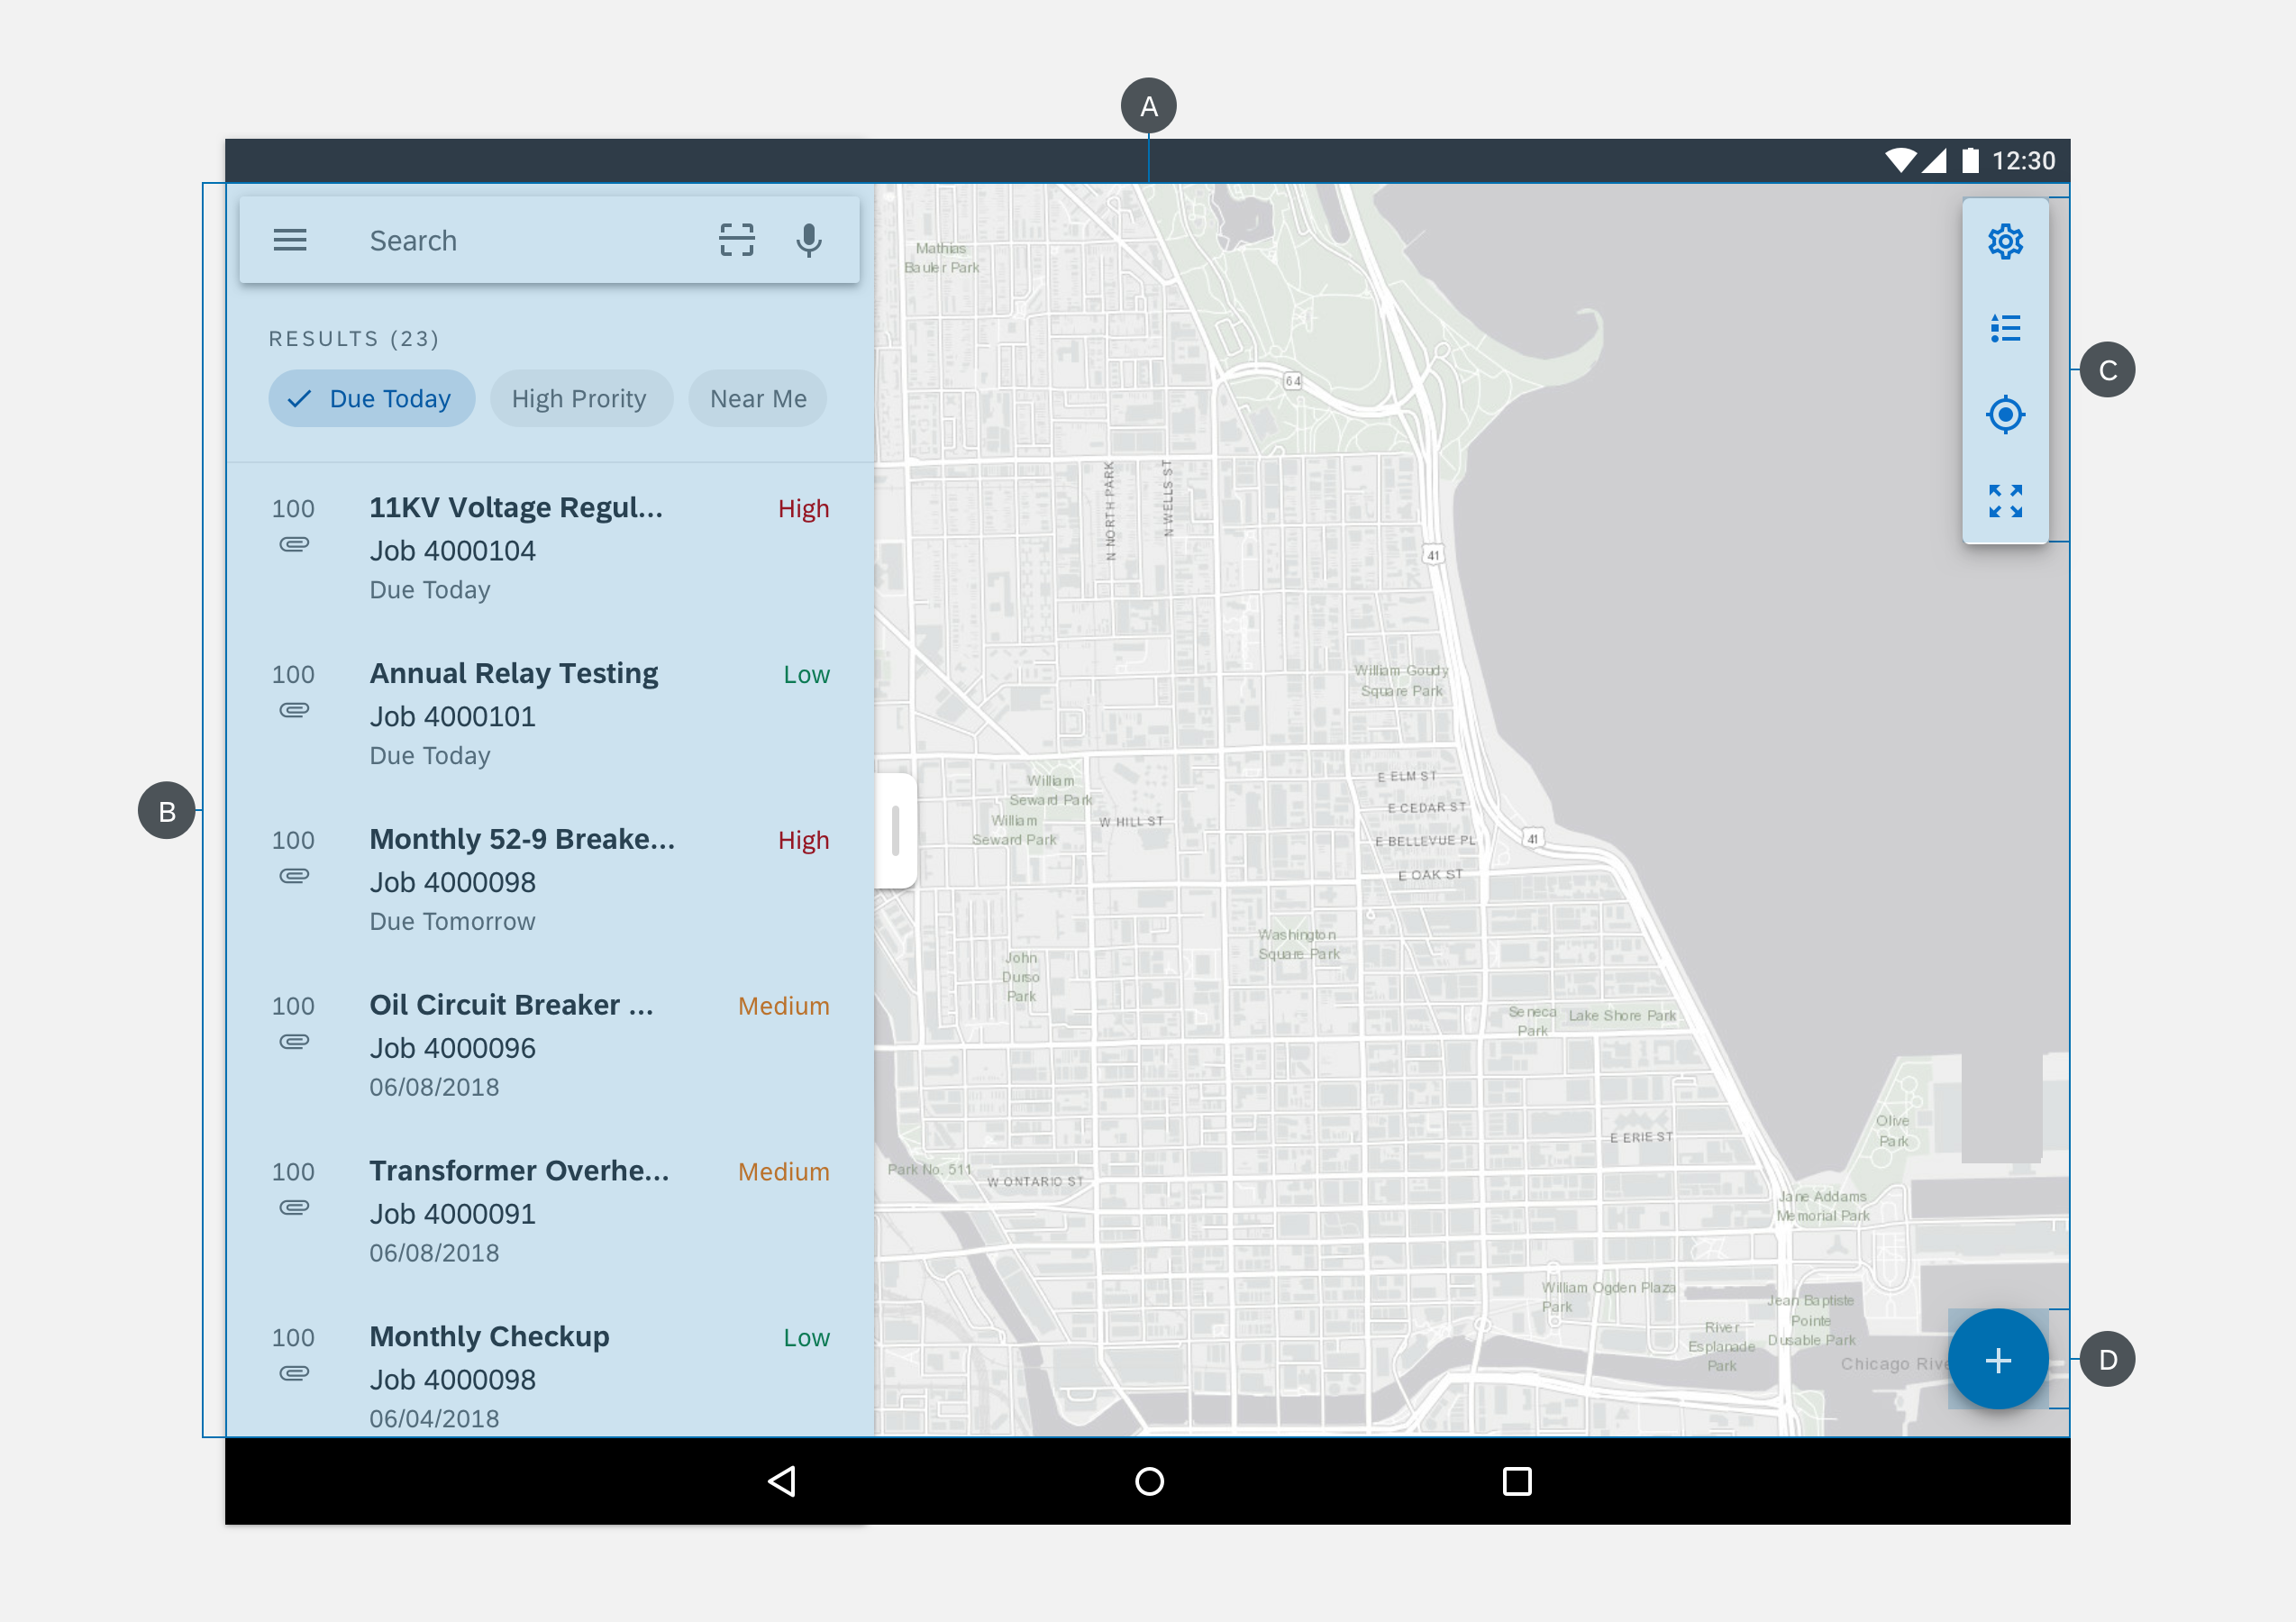 Map Sap Fiori For Android Design, Google Maps Landscape Mode Android